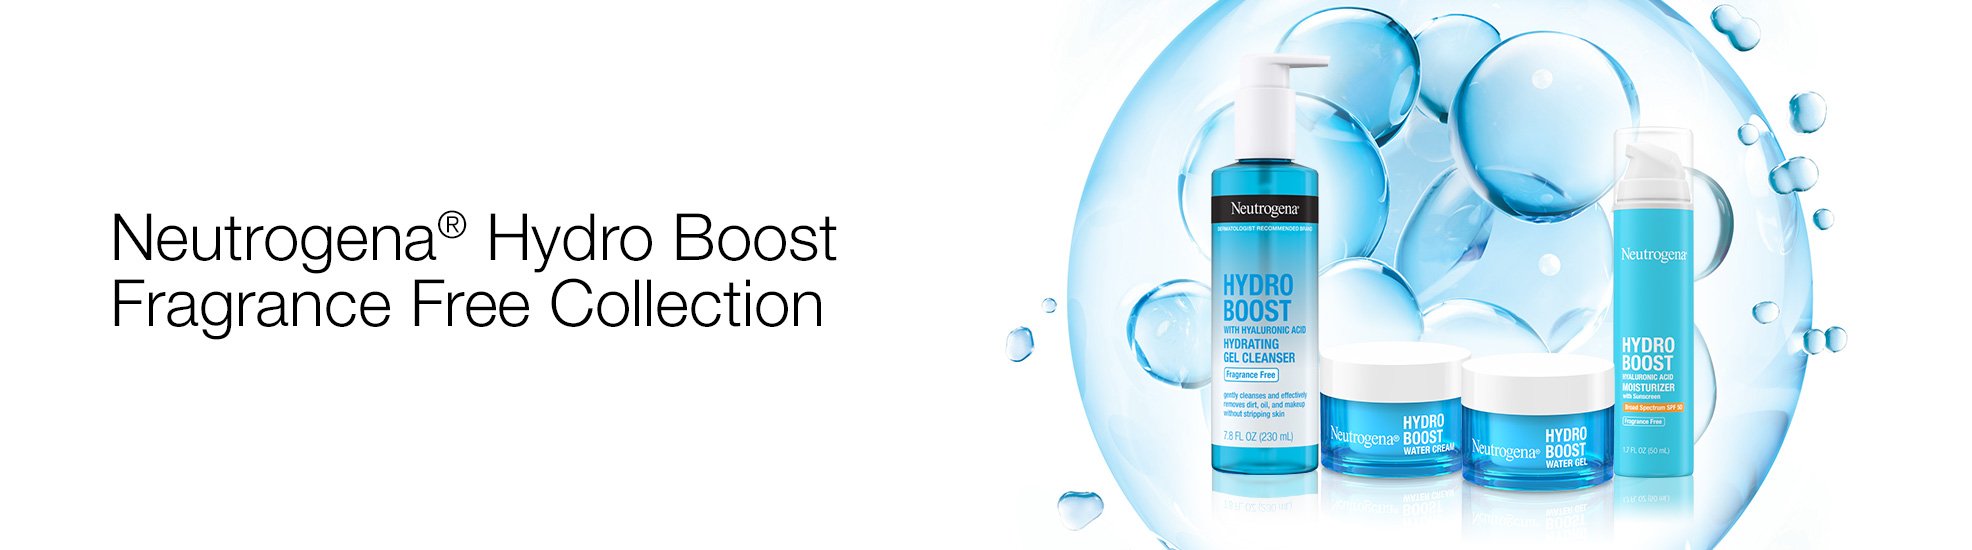 Neutrogena® Hydro Boost Fragrance Free Collection